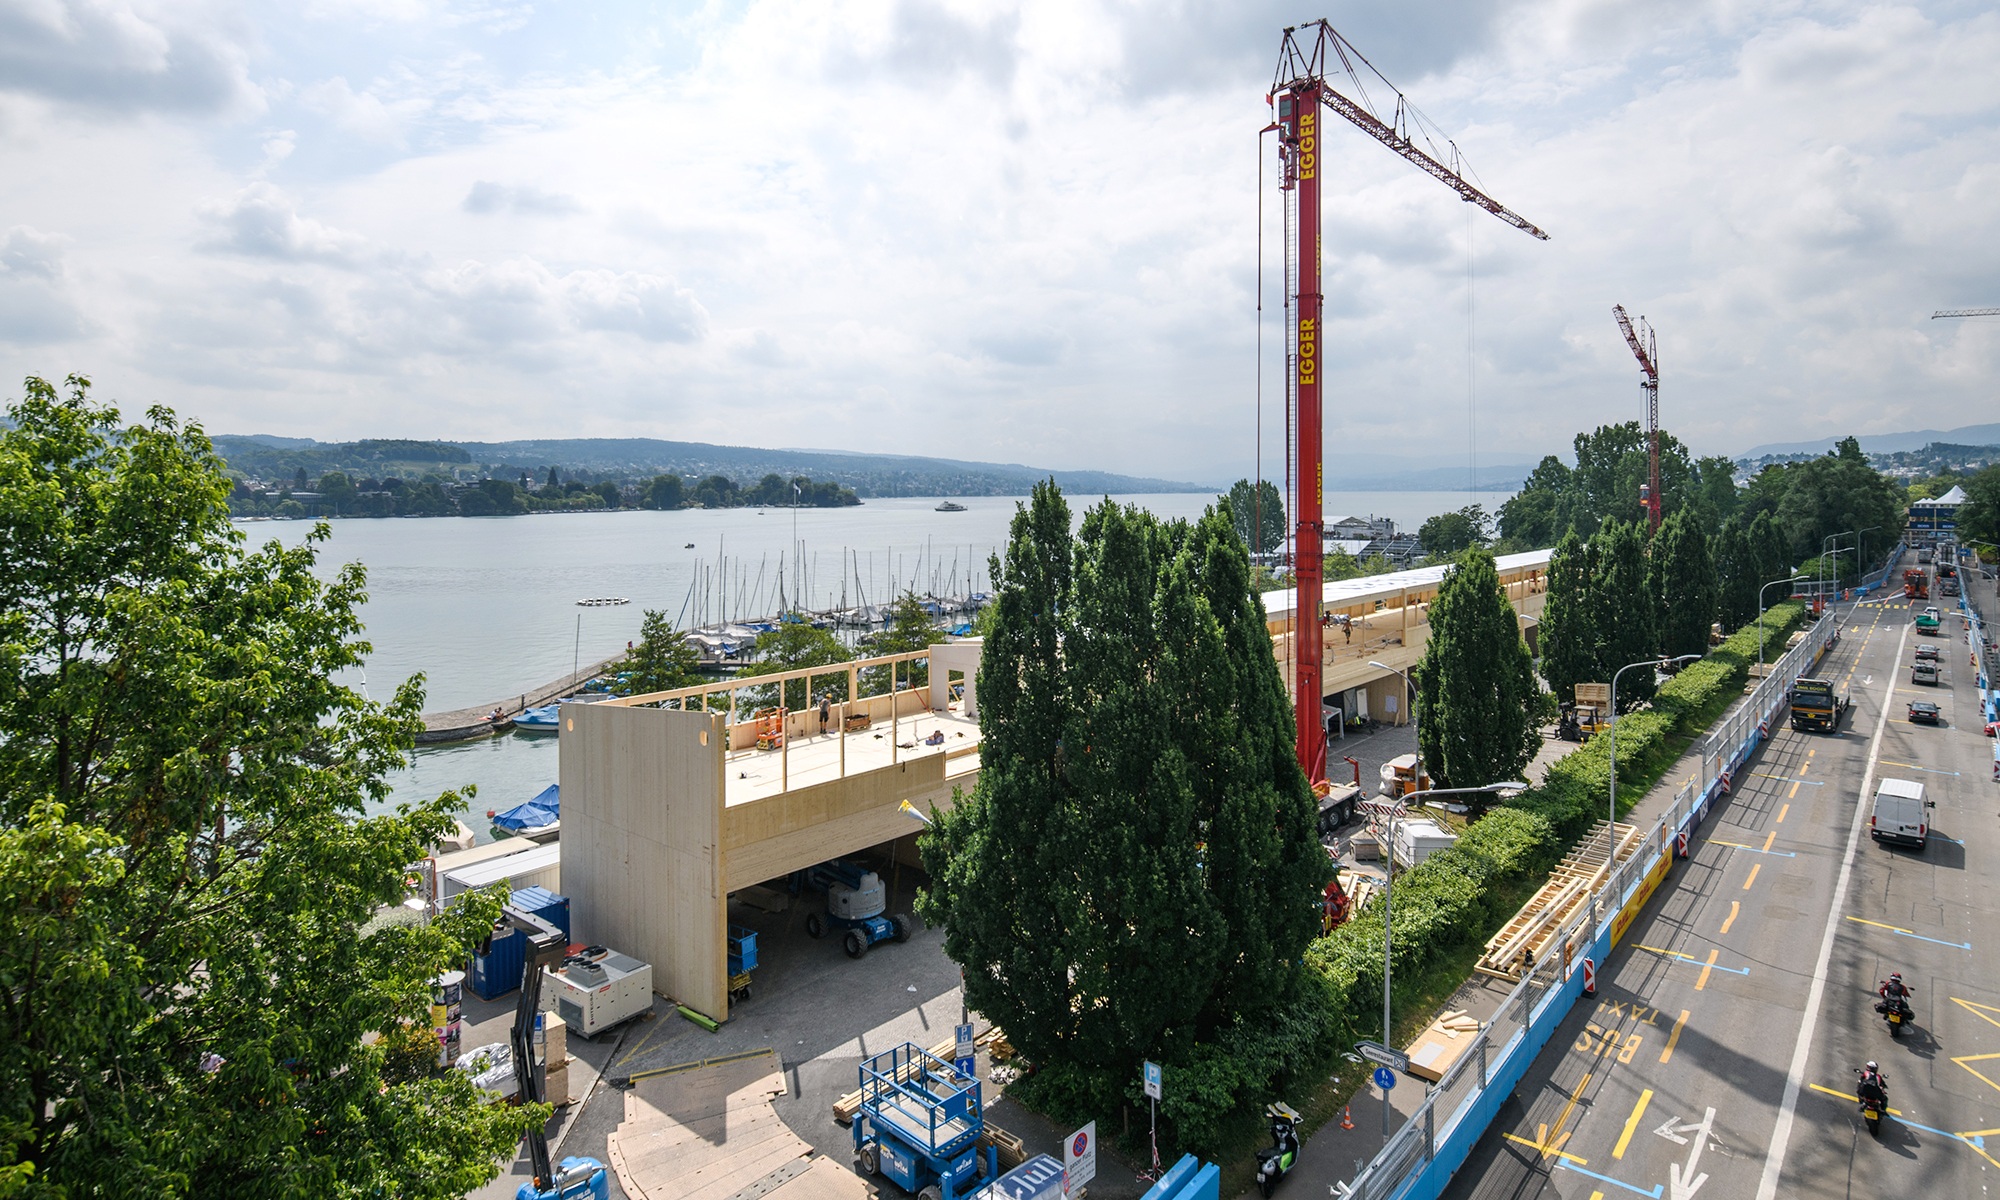 The photograph shows the Formula E construction in Zurich. In the background, you can see the lake and harbour entrance immediately behind the event construction.